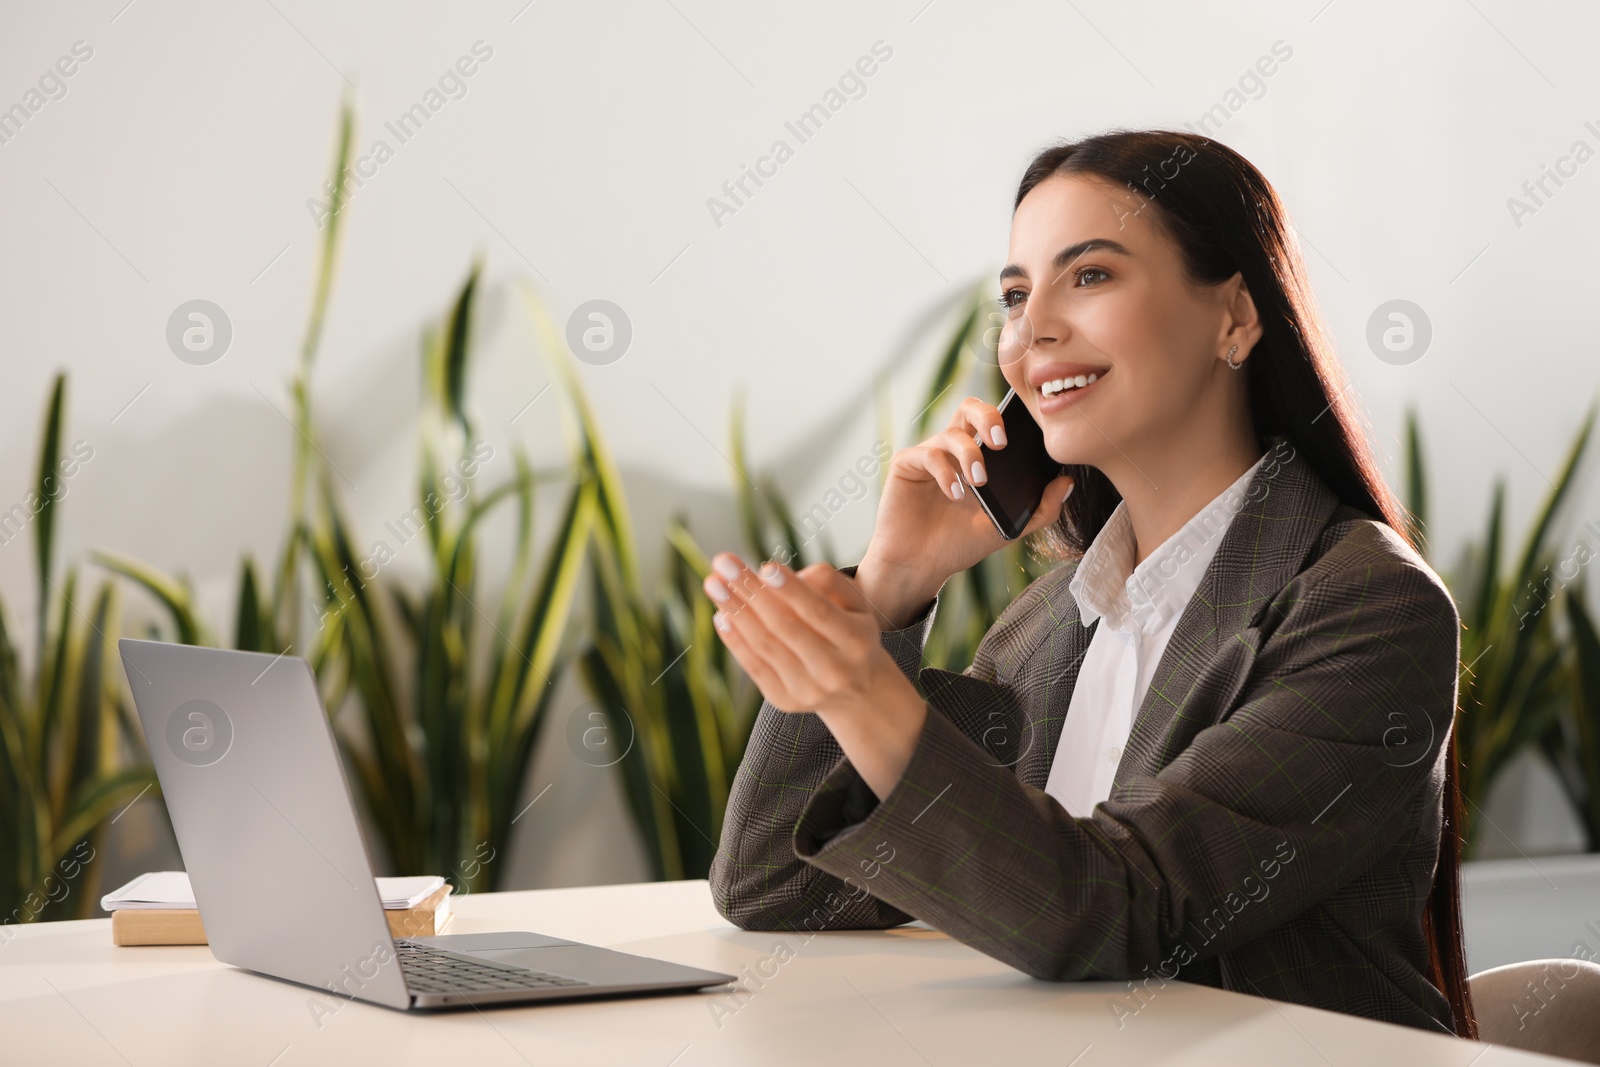 Photo of Happy woman using modern laptop while talking on smartphone at desk in office